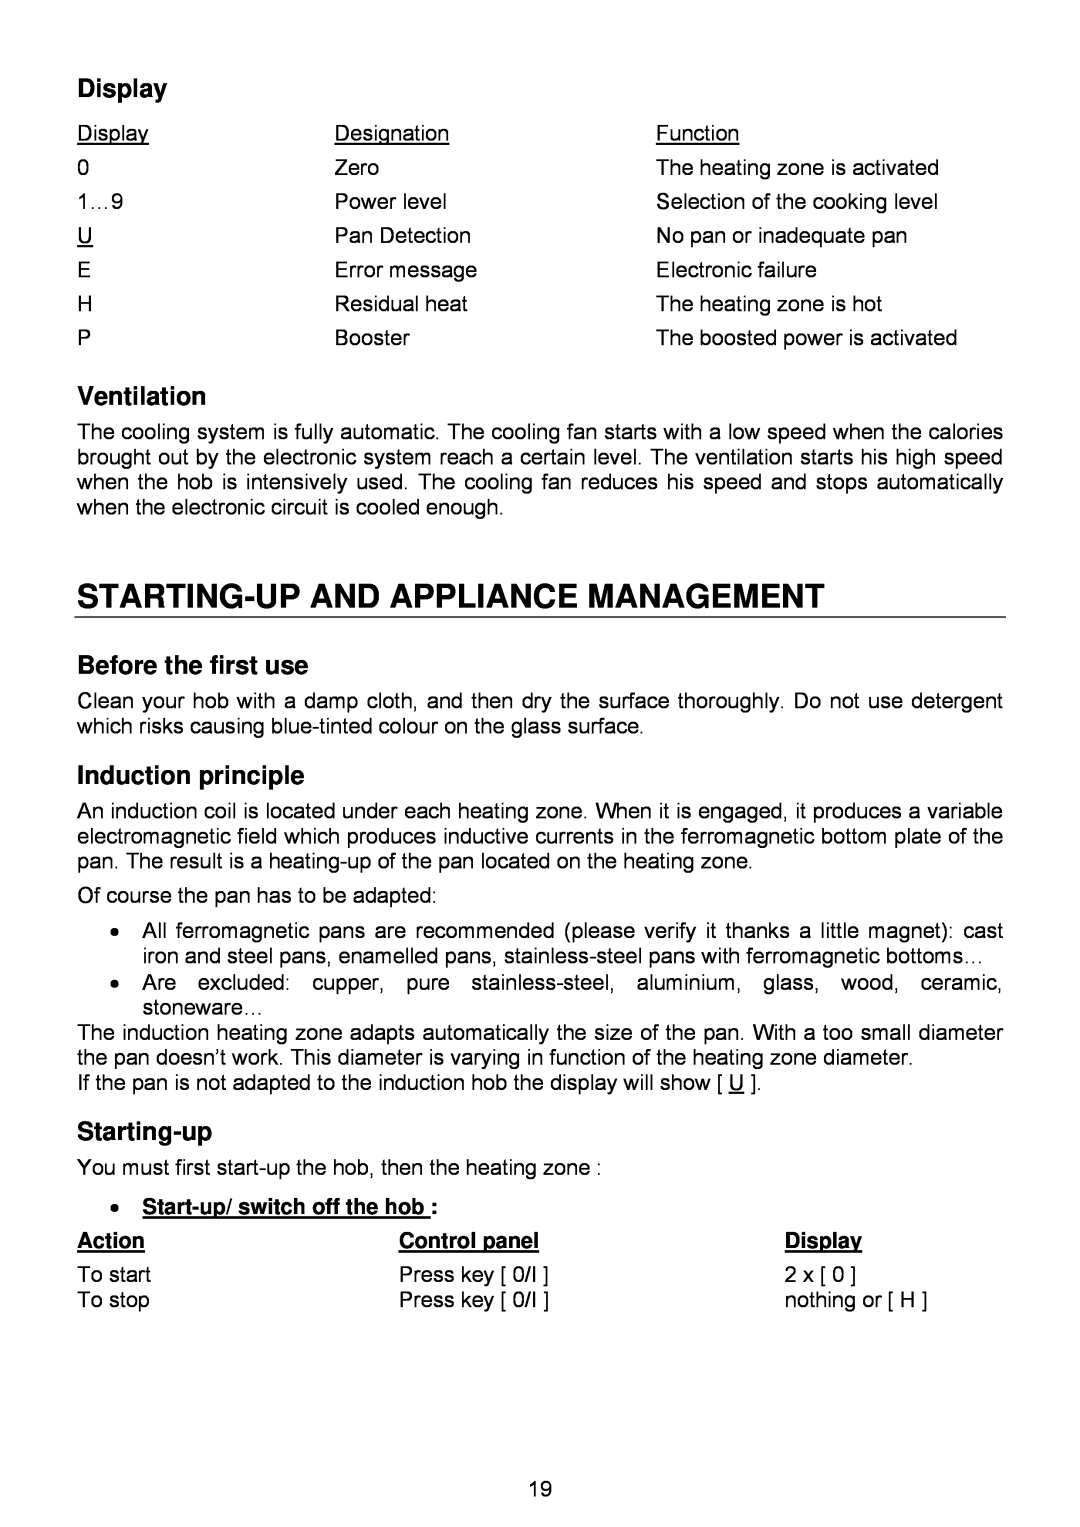 Foster 7322 240 Starting-Upand Appliance Management, Display, Ventilation, Before the first use, Induction principle 